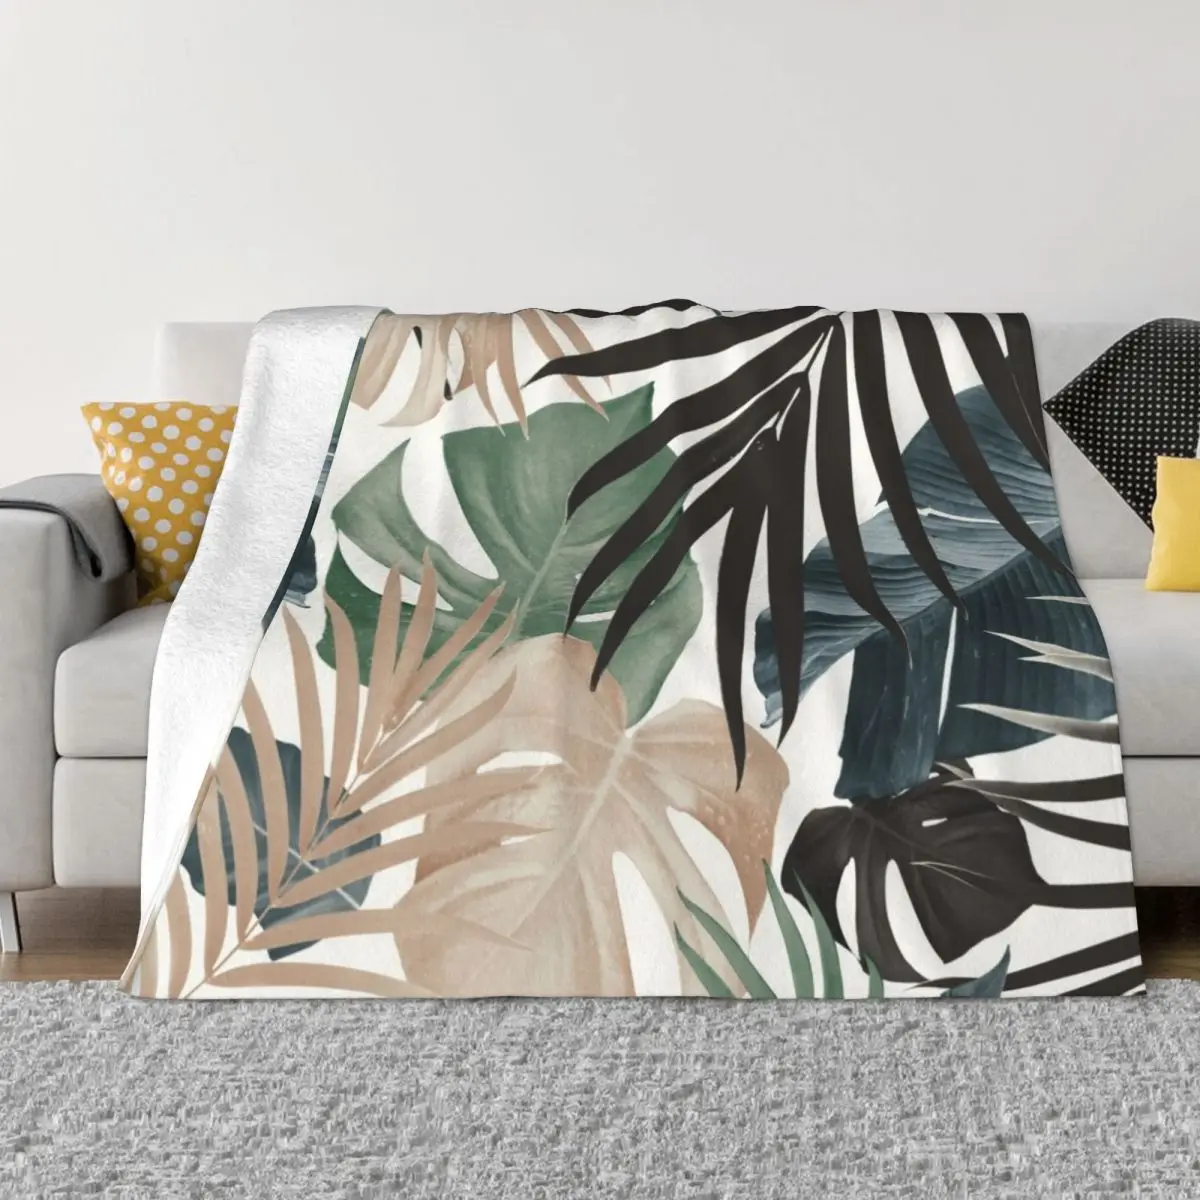 

Tropical Jungle Leaves Pattern #13 (Fall Colors) #tropical #decor #art Throw Blanket warm winter Thermal Blankets